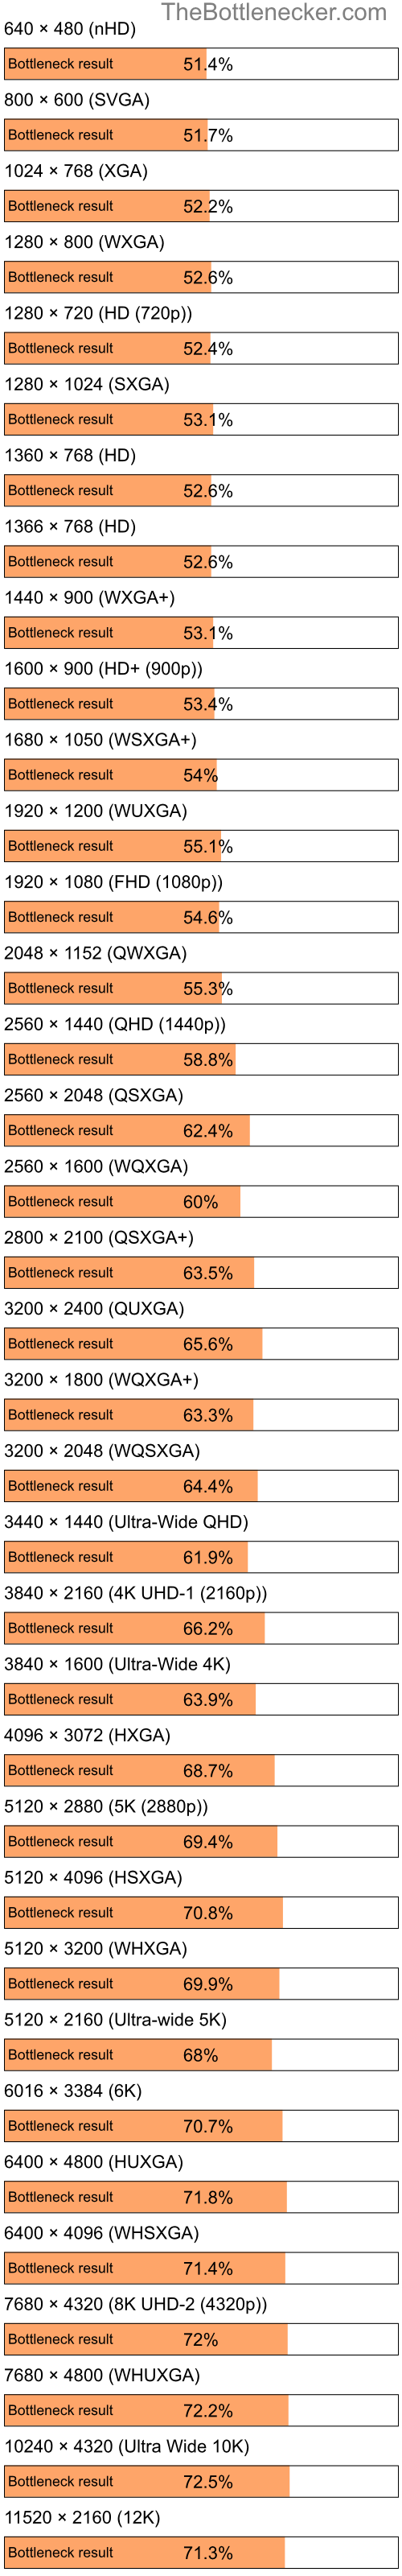 Bottleneck results by resolution for Intel Celeron M 410 and NVIDIA Quadro FX 3400 in Processor Intense Tasks